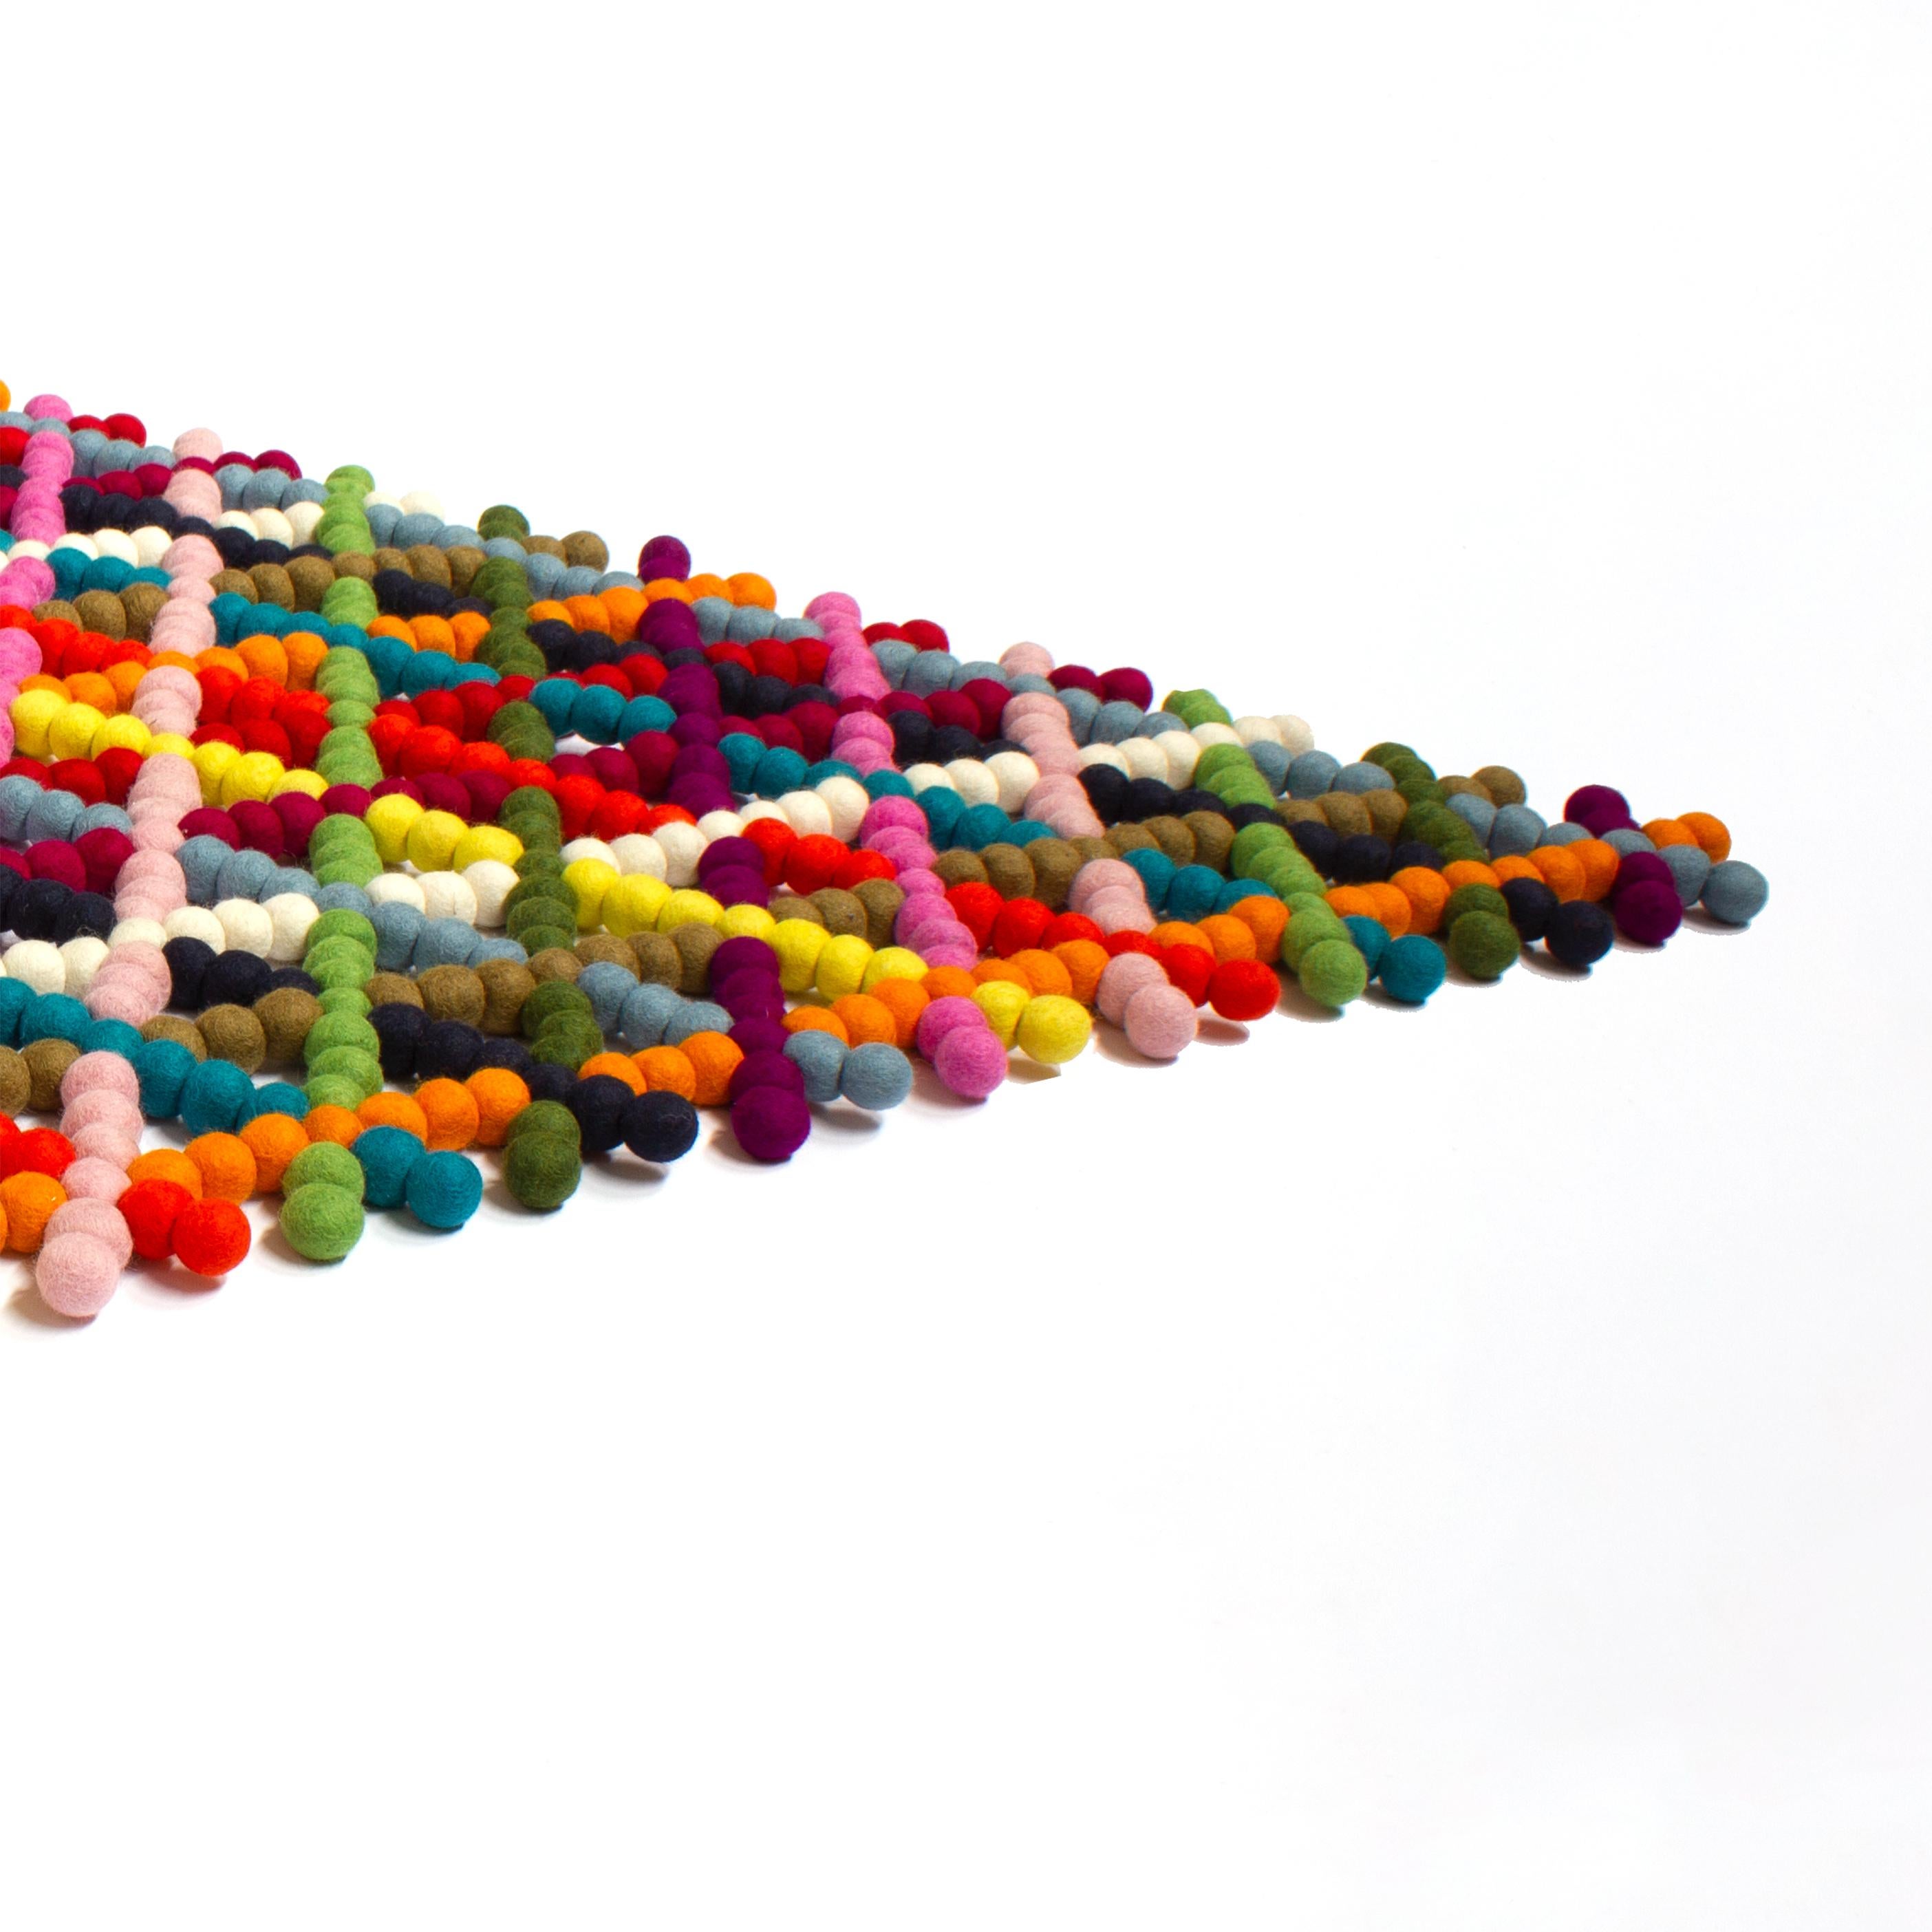 Contemporary Colorful One of a kind Wool Felt Rug  im Zustand „Neu“ im Angebot in ROTTERDAM, NL